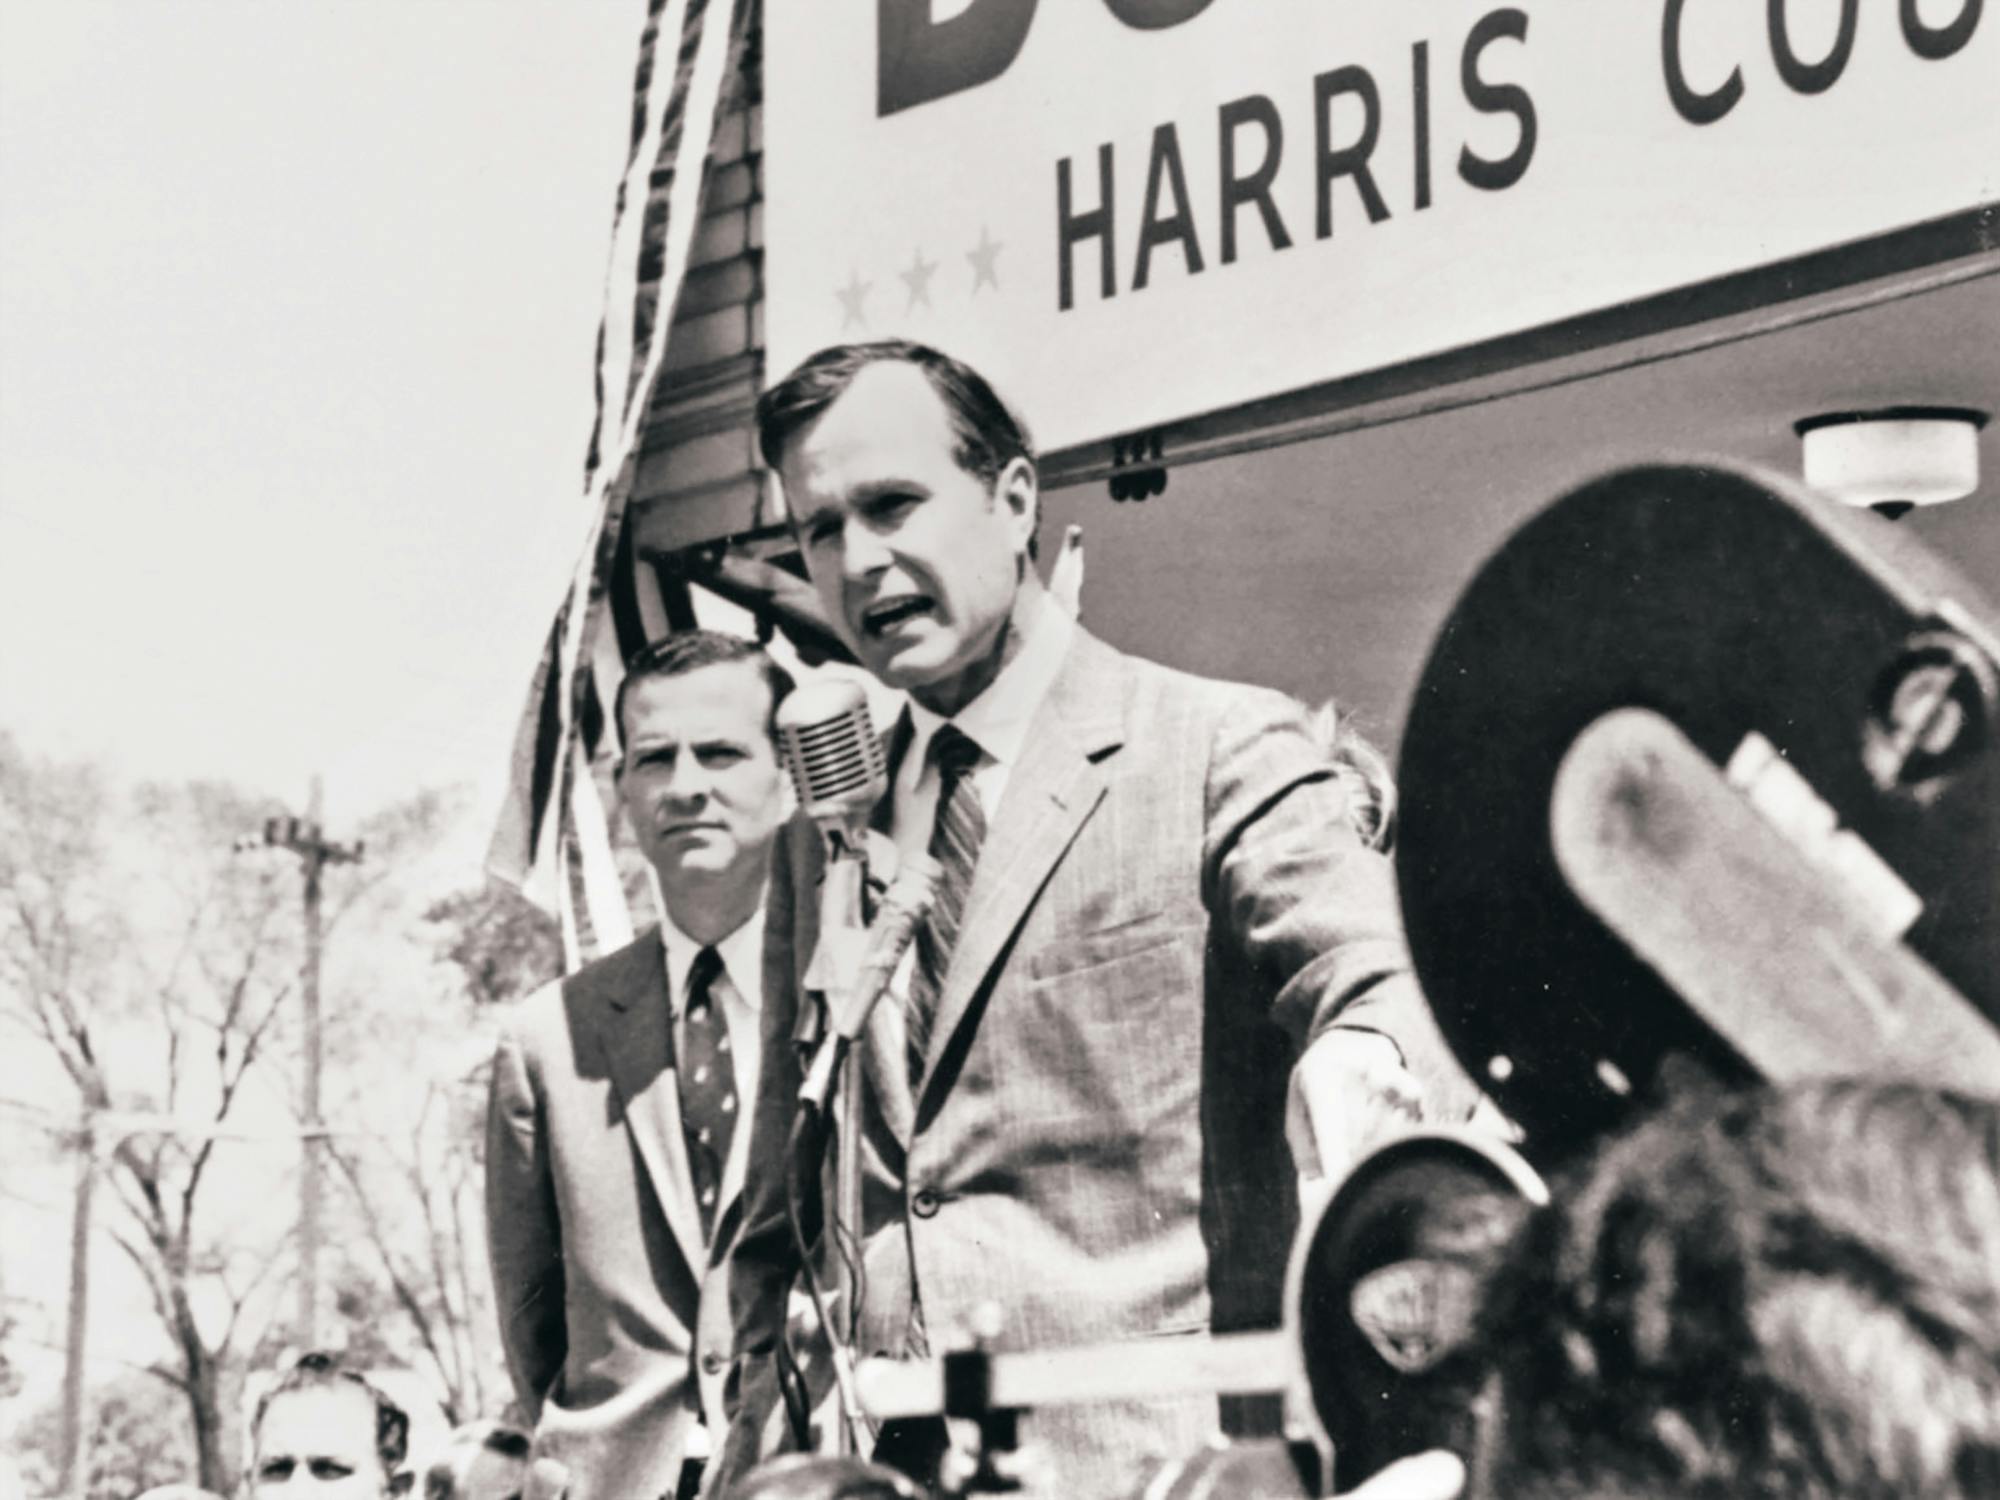 Baker and Bush at a Bush Senate campaign appearance in Harris County in 1970.